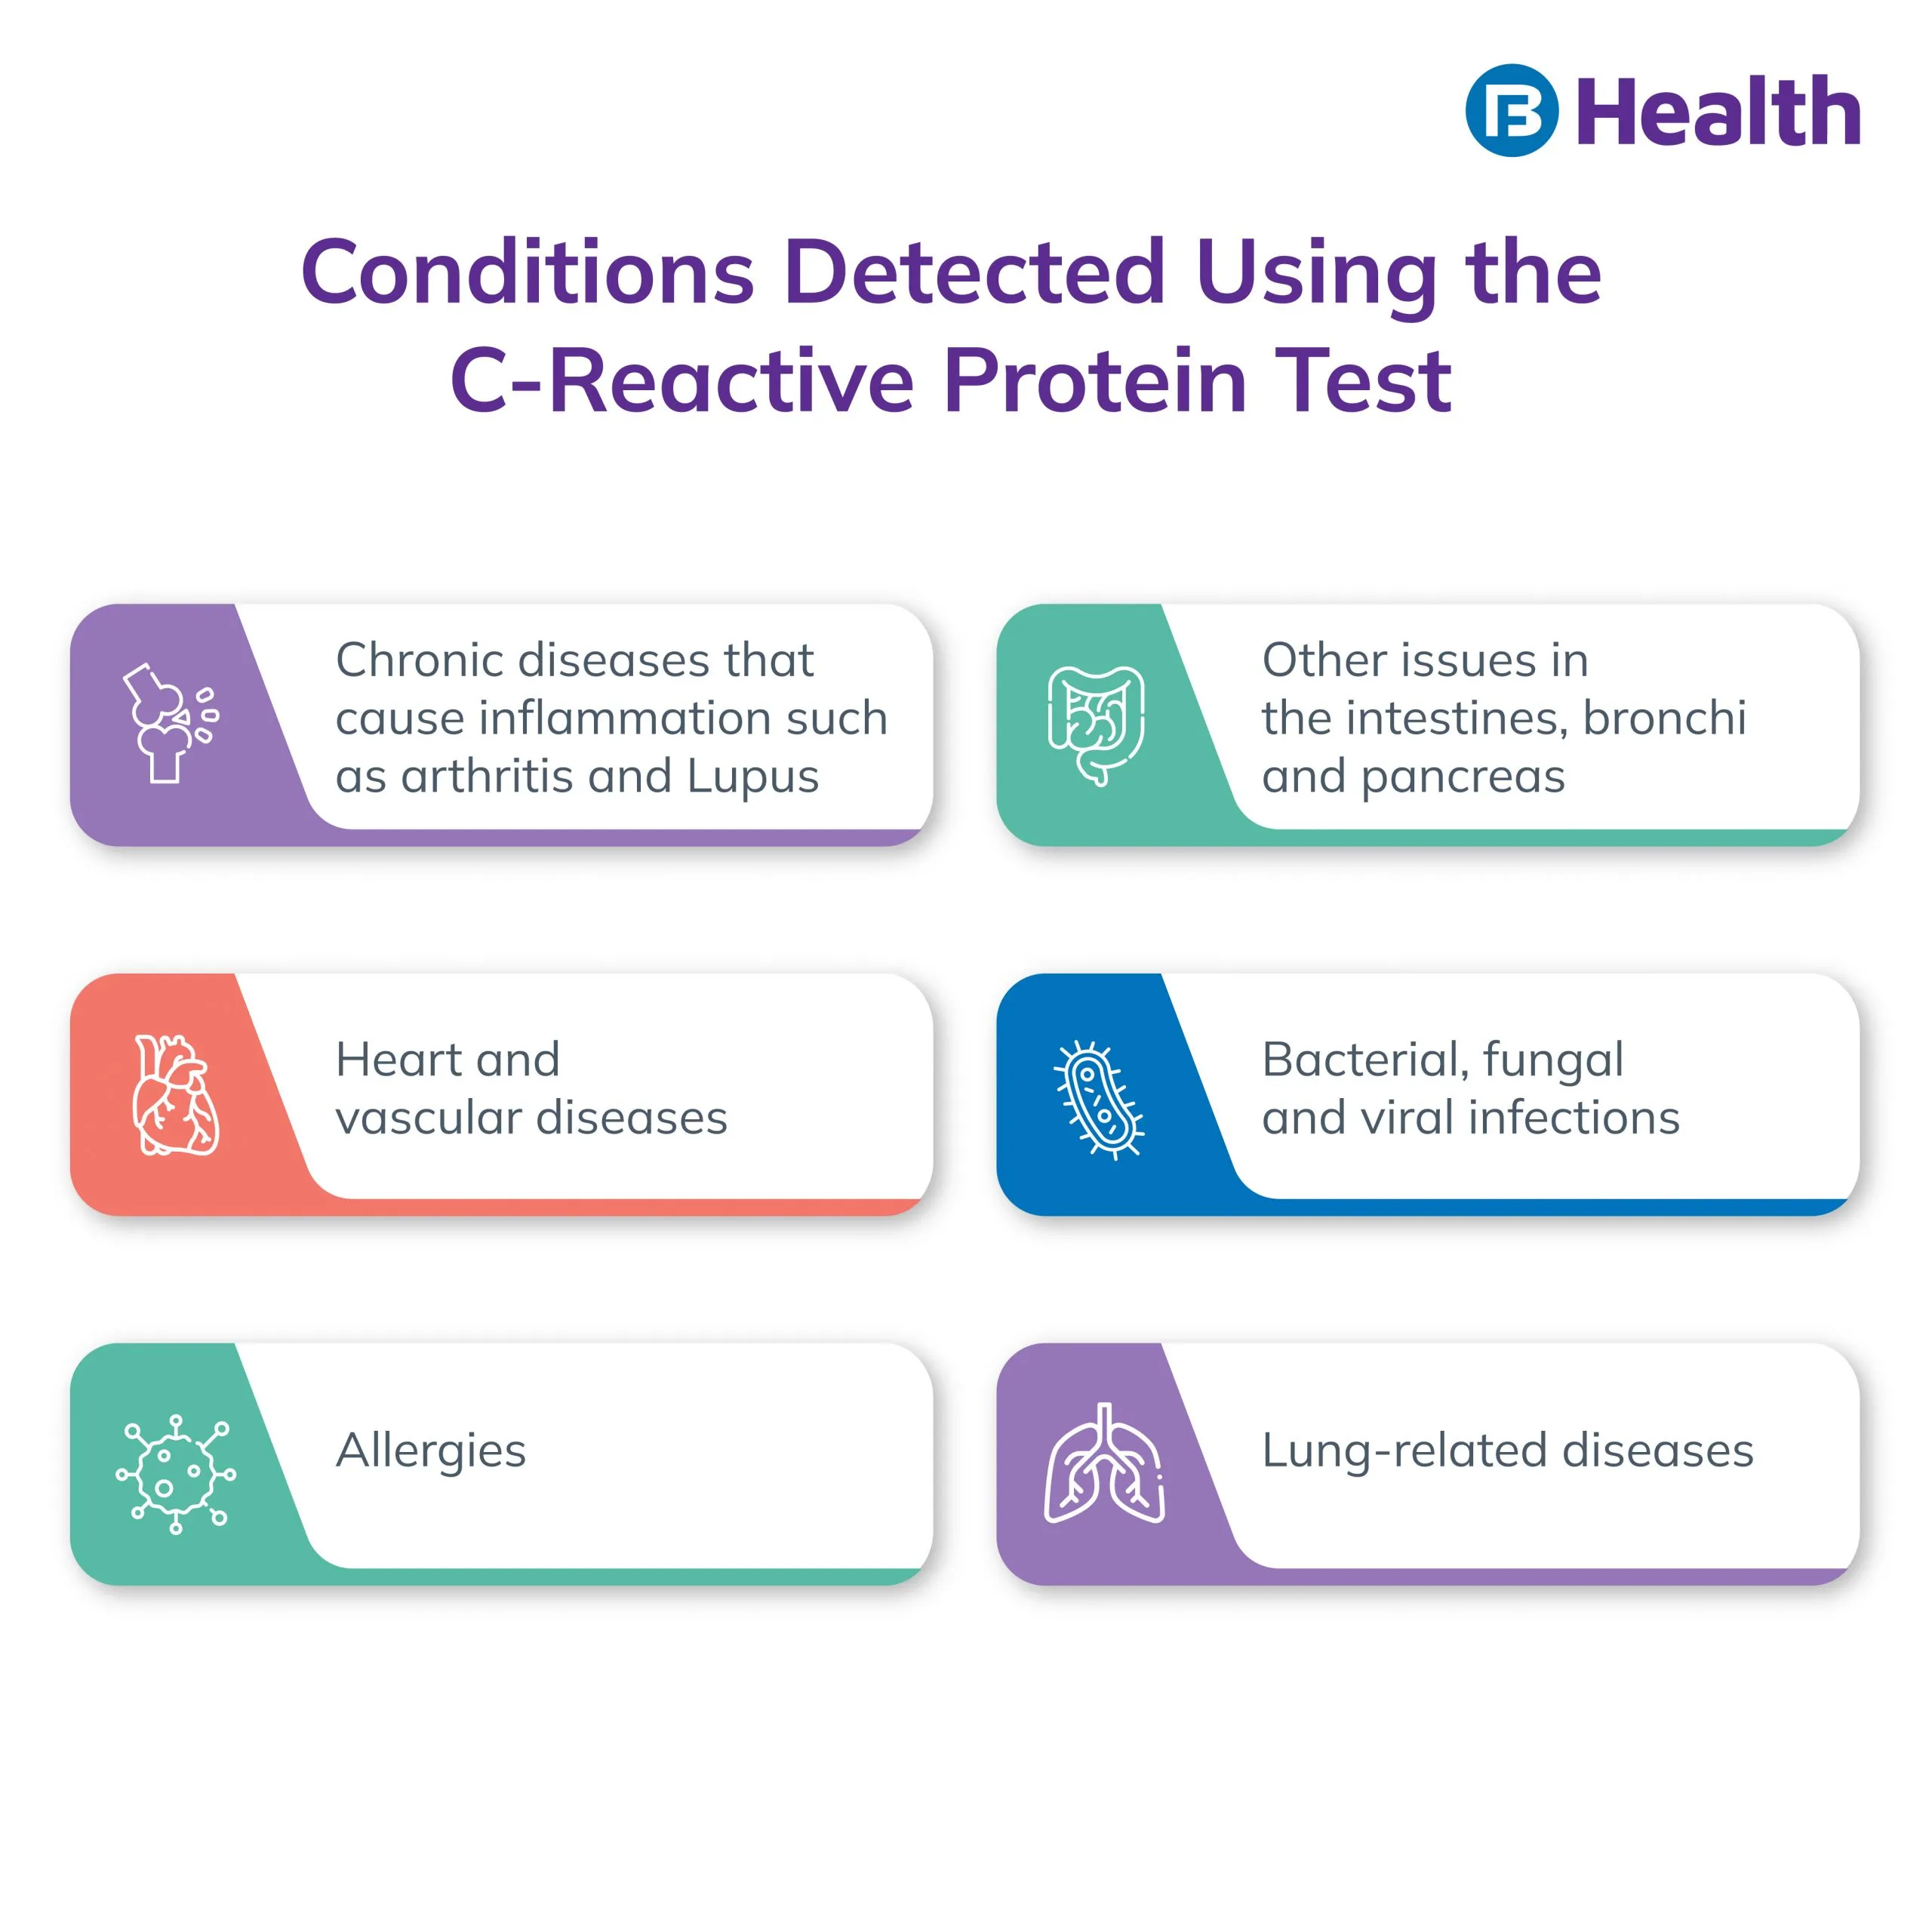 C-Reactive Protein Test results